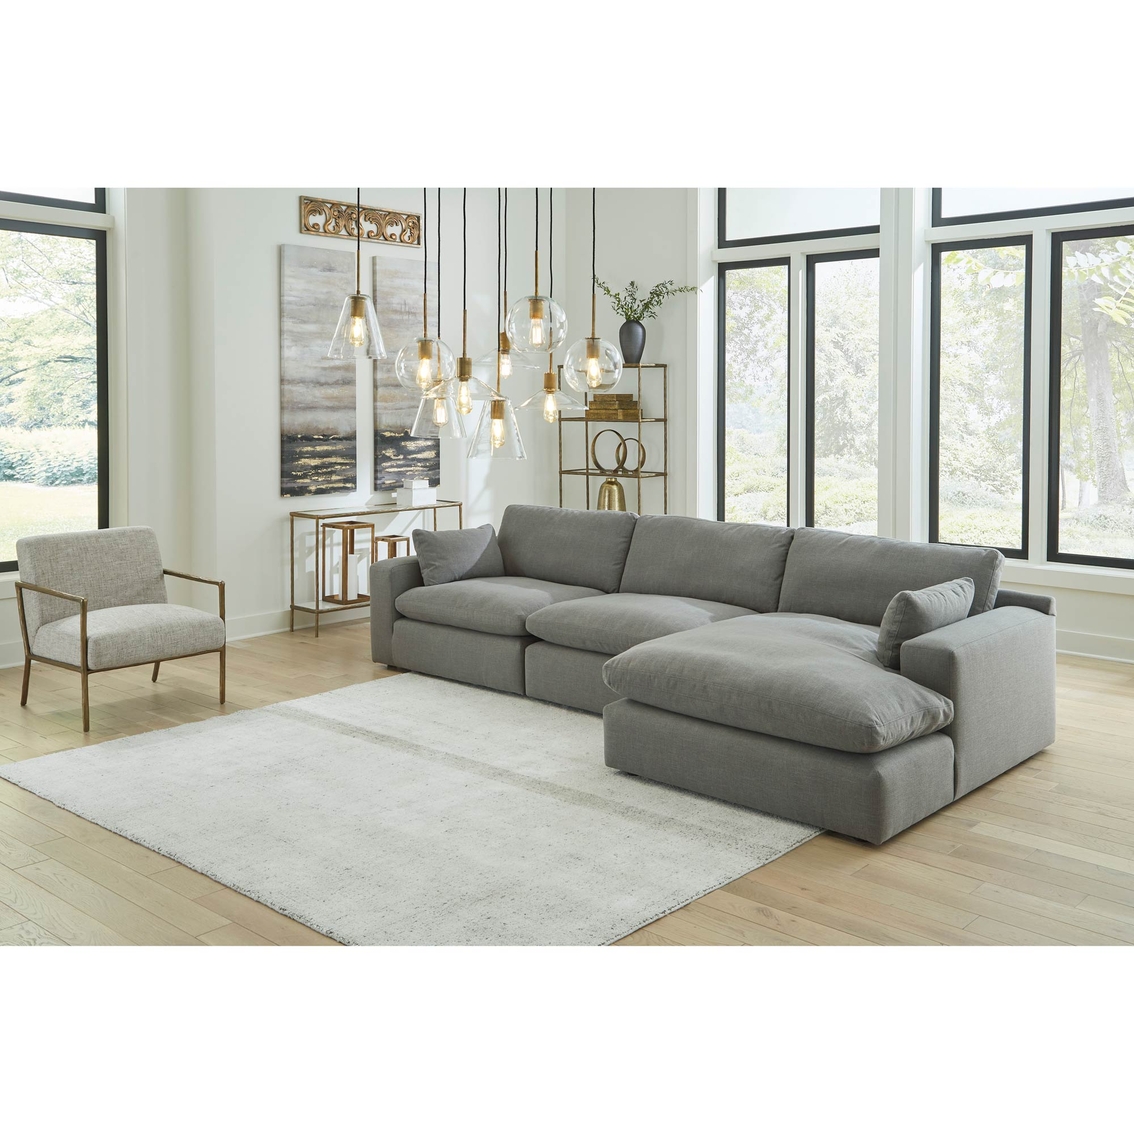 Millennium by Ashley Elyza 3 pc. Sectional with Chaise - Image 4 of 4